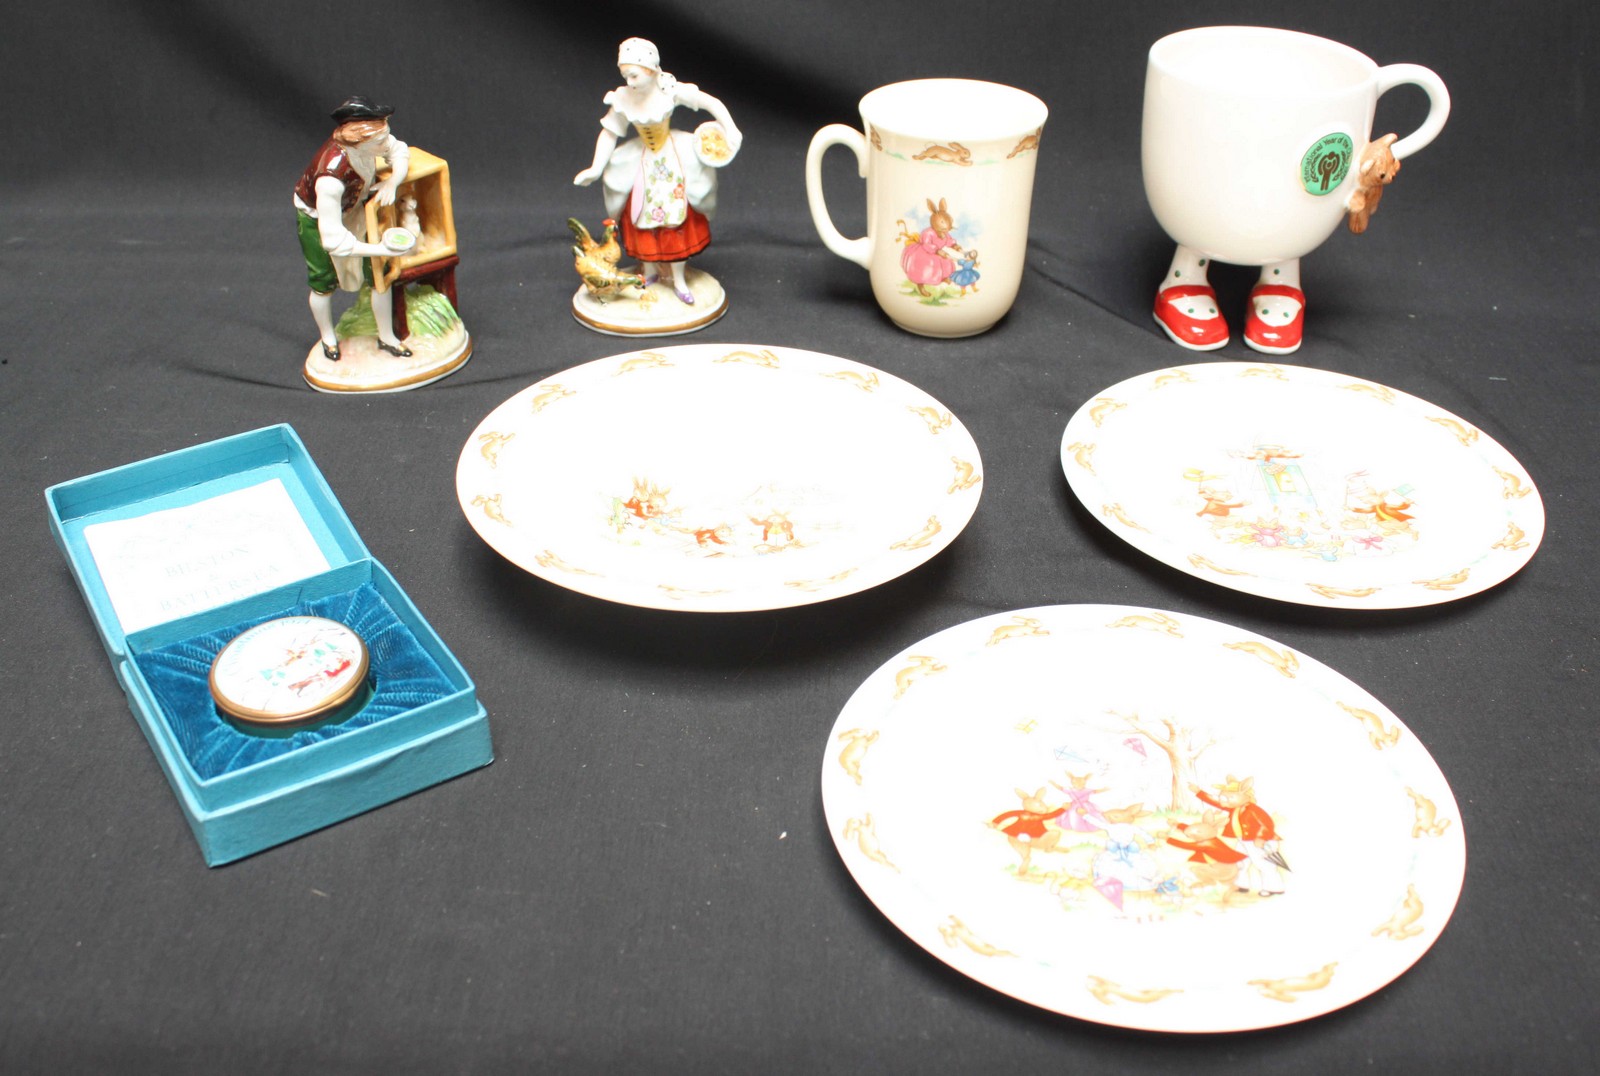 A small collection of ceramics including a pair of Sitzendorf porcelain figures, Bunnykins ware